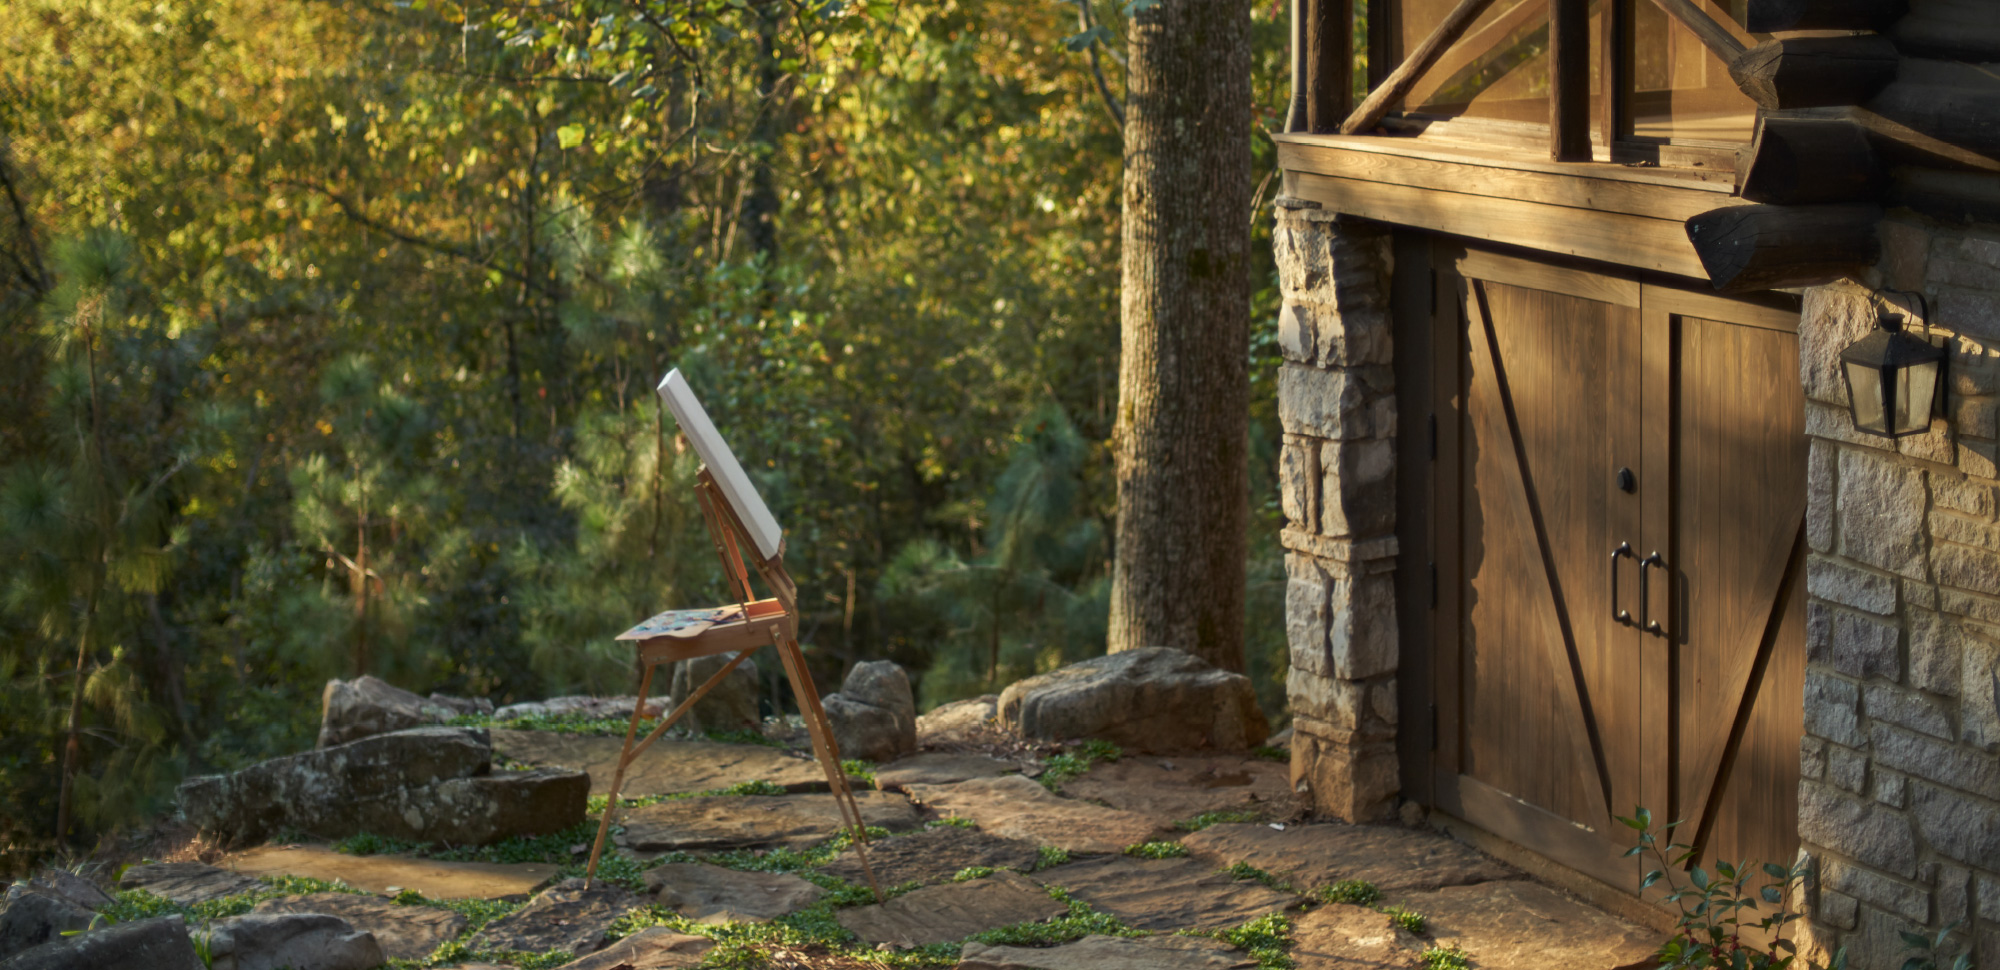 Photograph of a painter's easel holding an empty canvas sitting outside next to a Loghaven cabin.